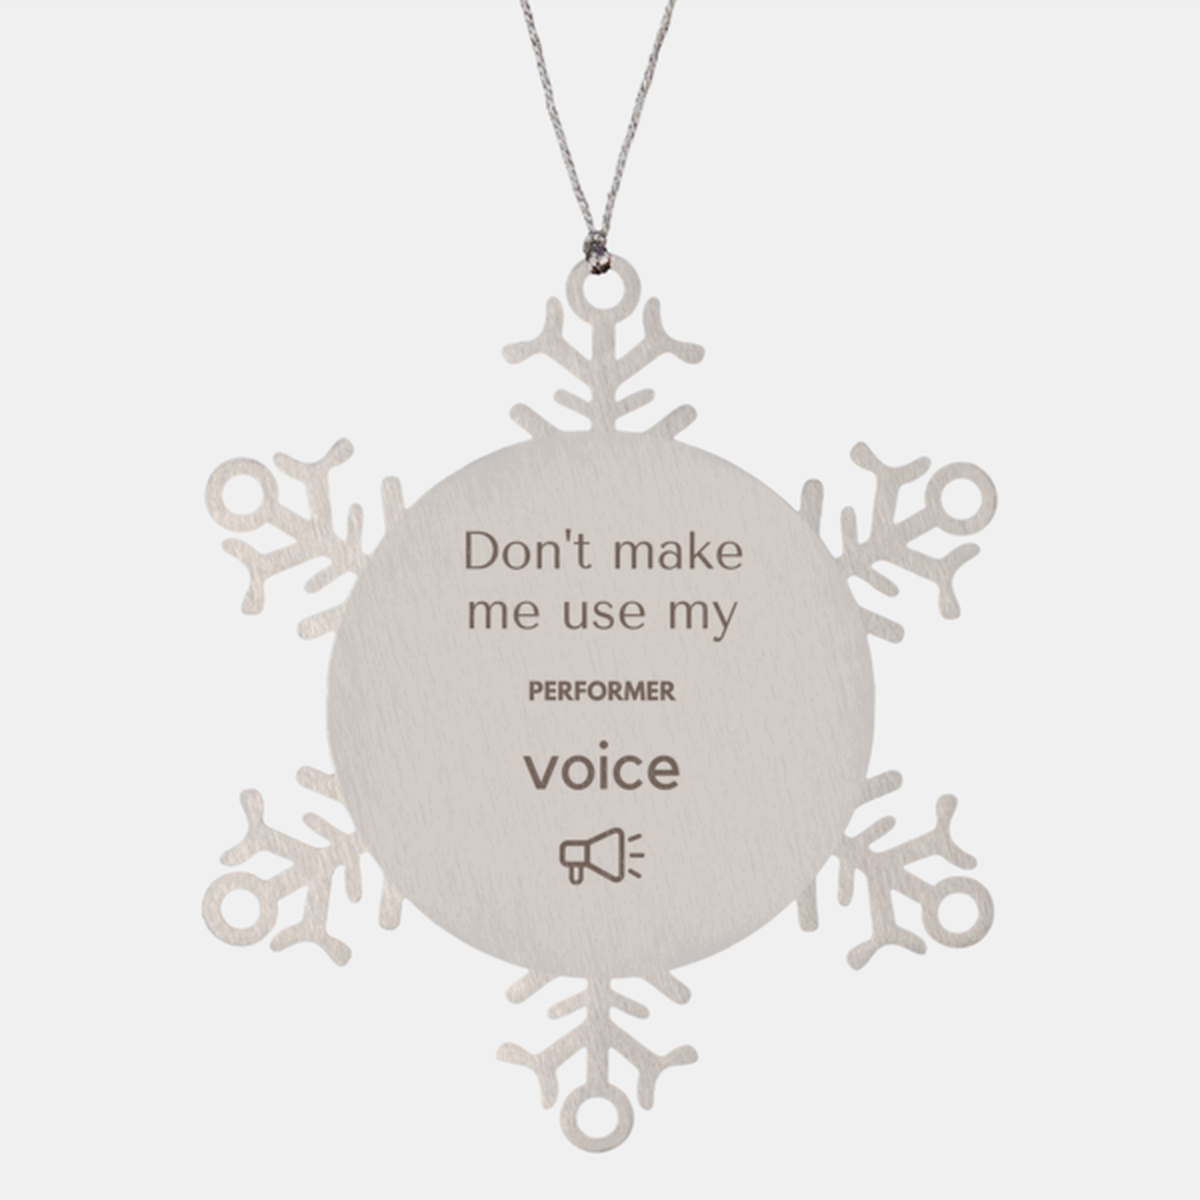 Don't make me use my Performer voice, Sarcasm Performer Ornament Gifts, Christmas Performer Snowflake Ornament Unique Gifts For Performer Coworkers, Men, Women, Colleague, Friends